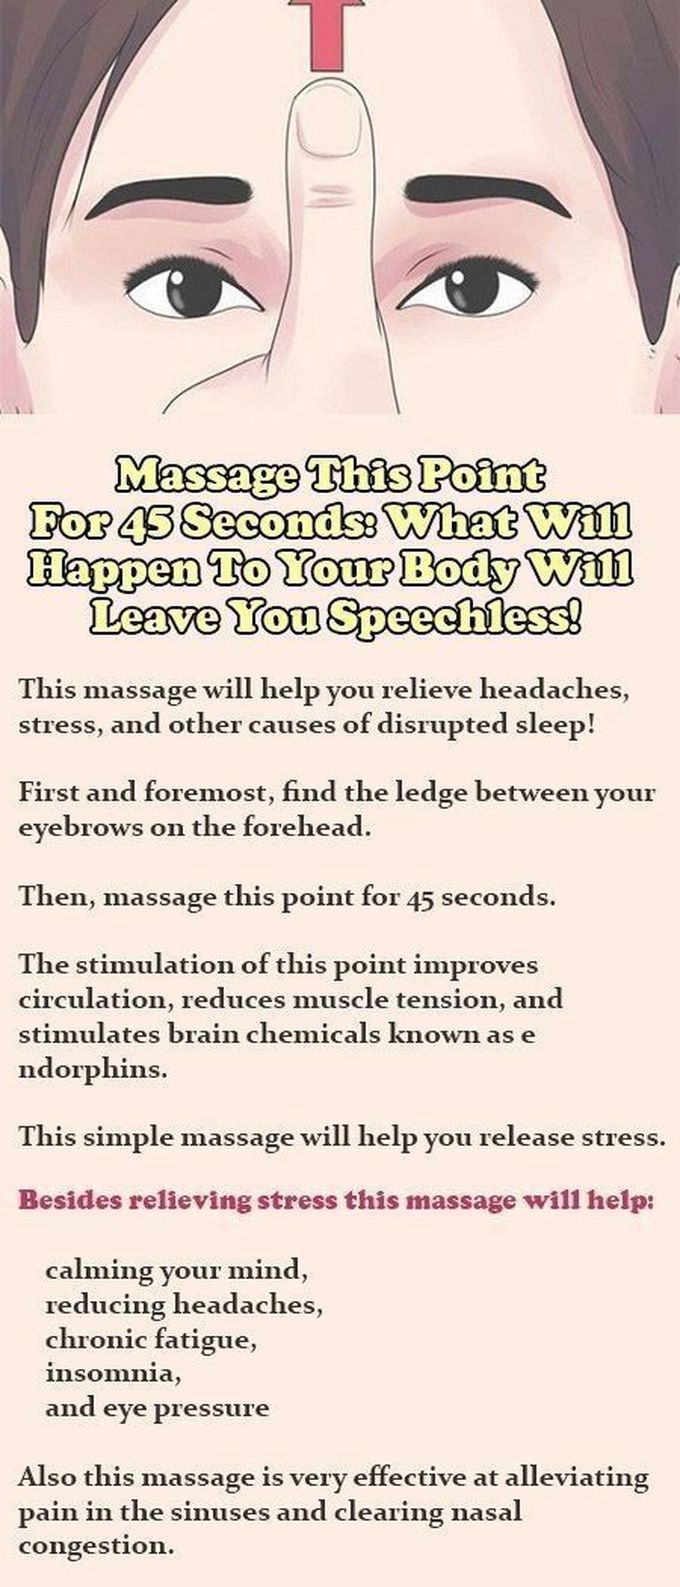 Pin by Wendy Lee on Accupressure | How to relieve headaches, Massage therapy, Shiatsu massage